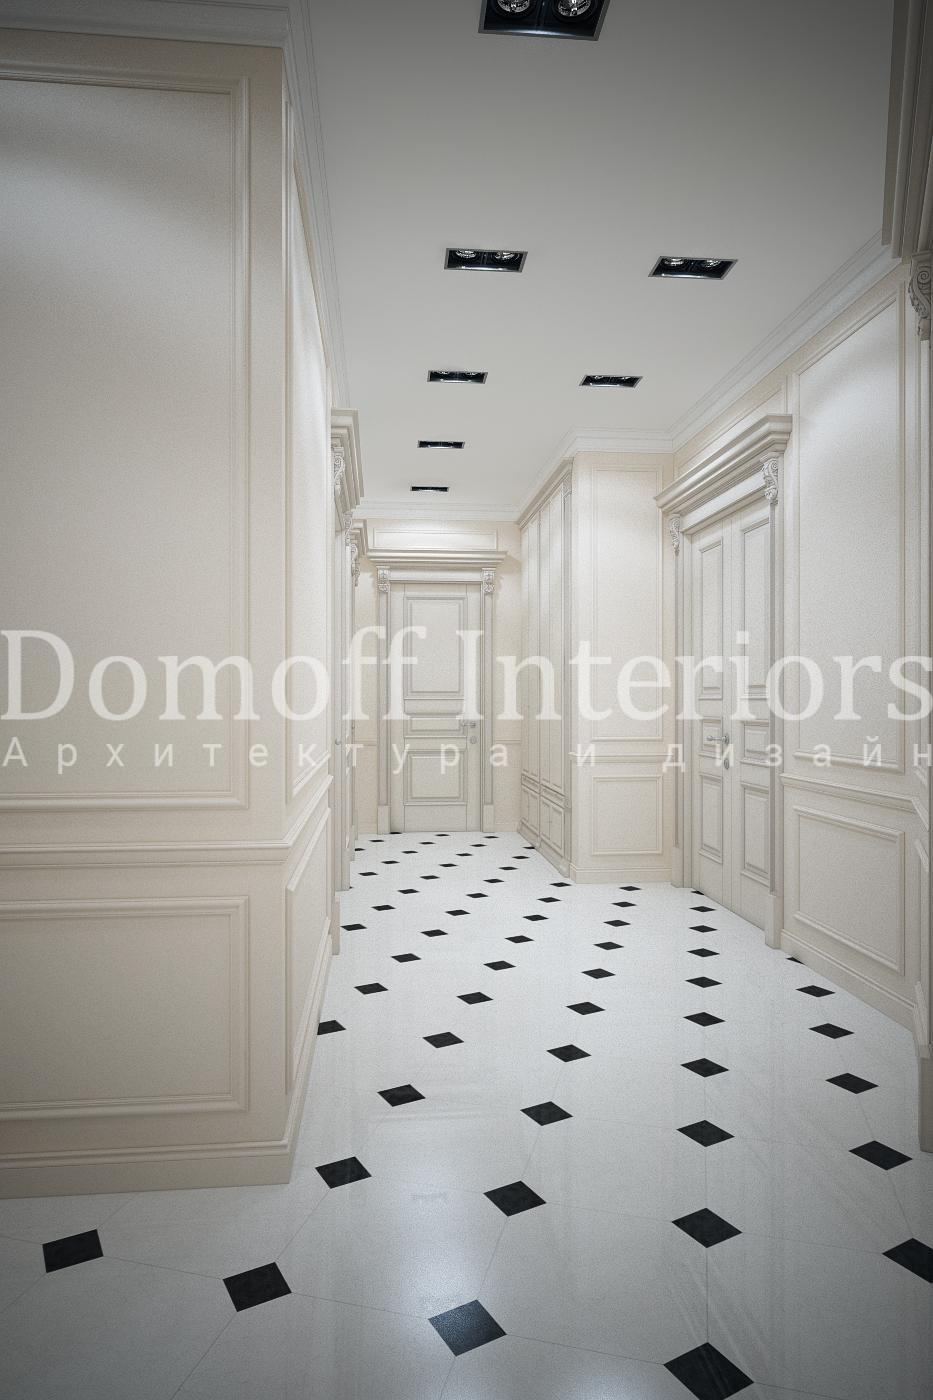 Corridor made in the style of Contemporary classics